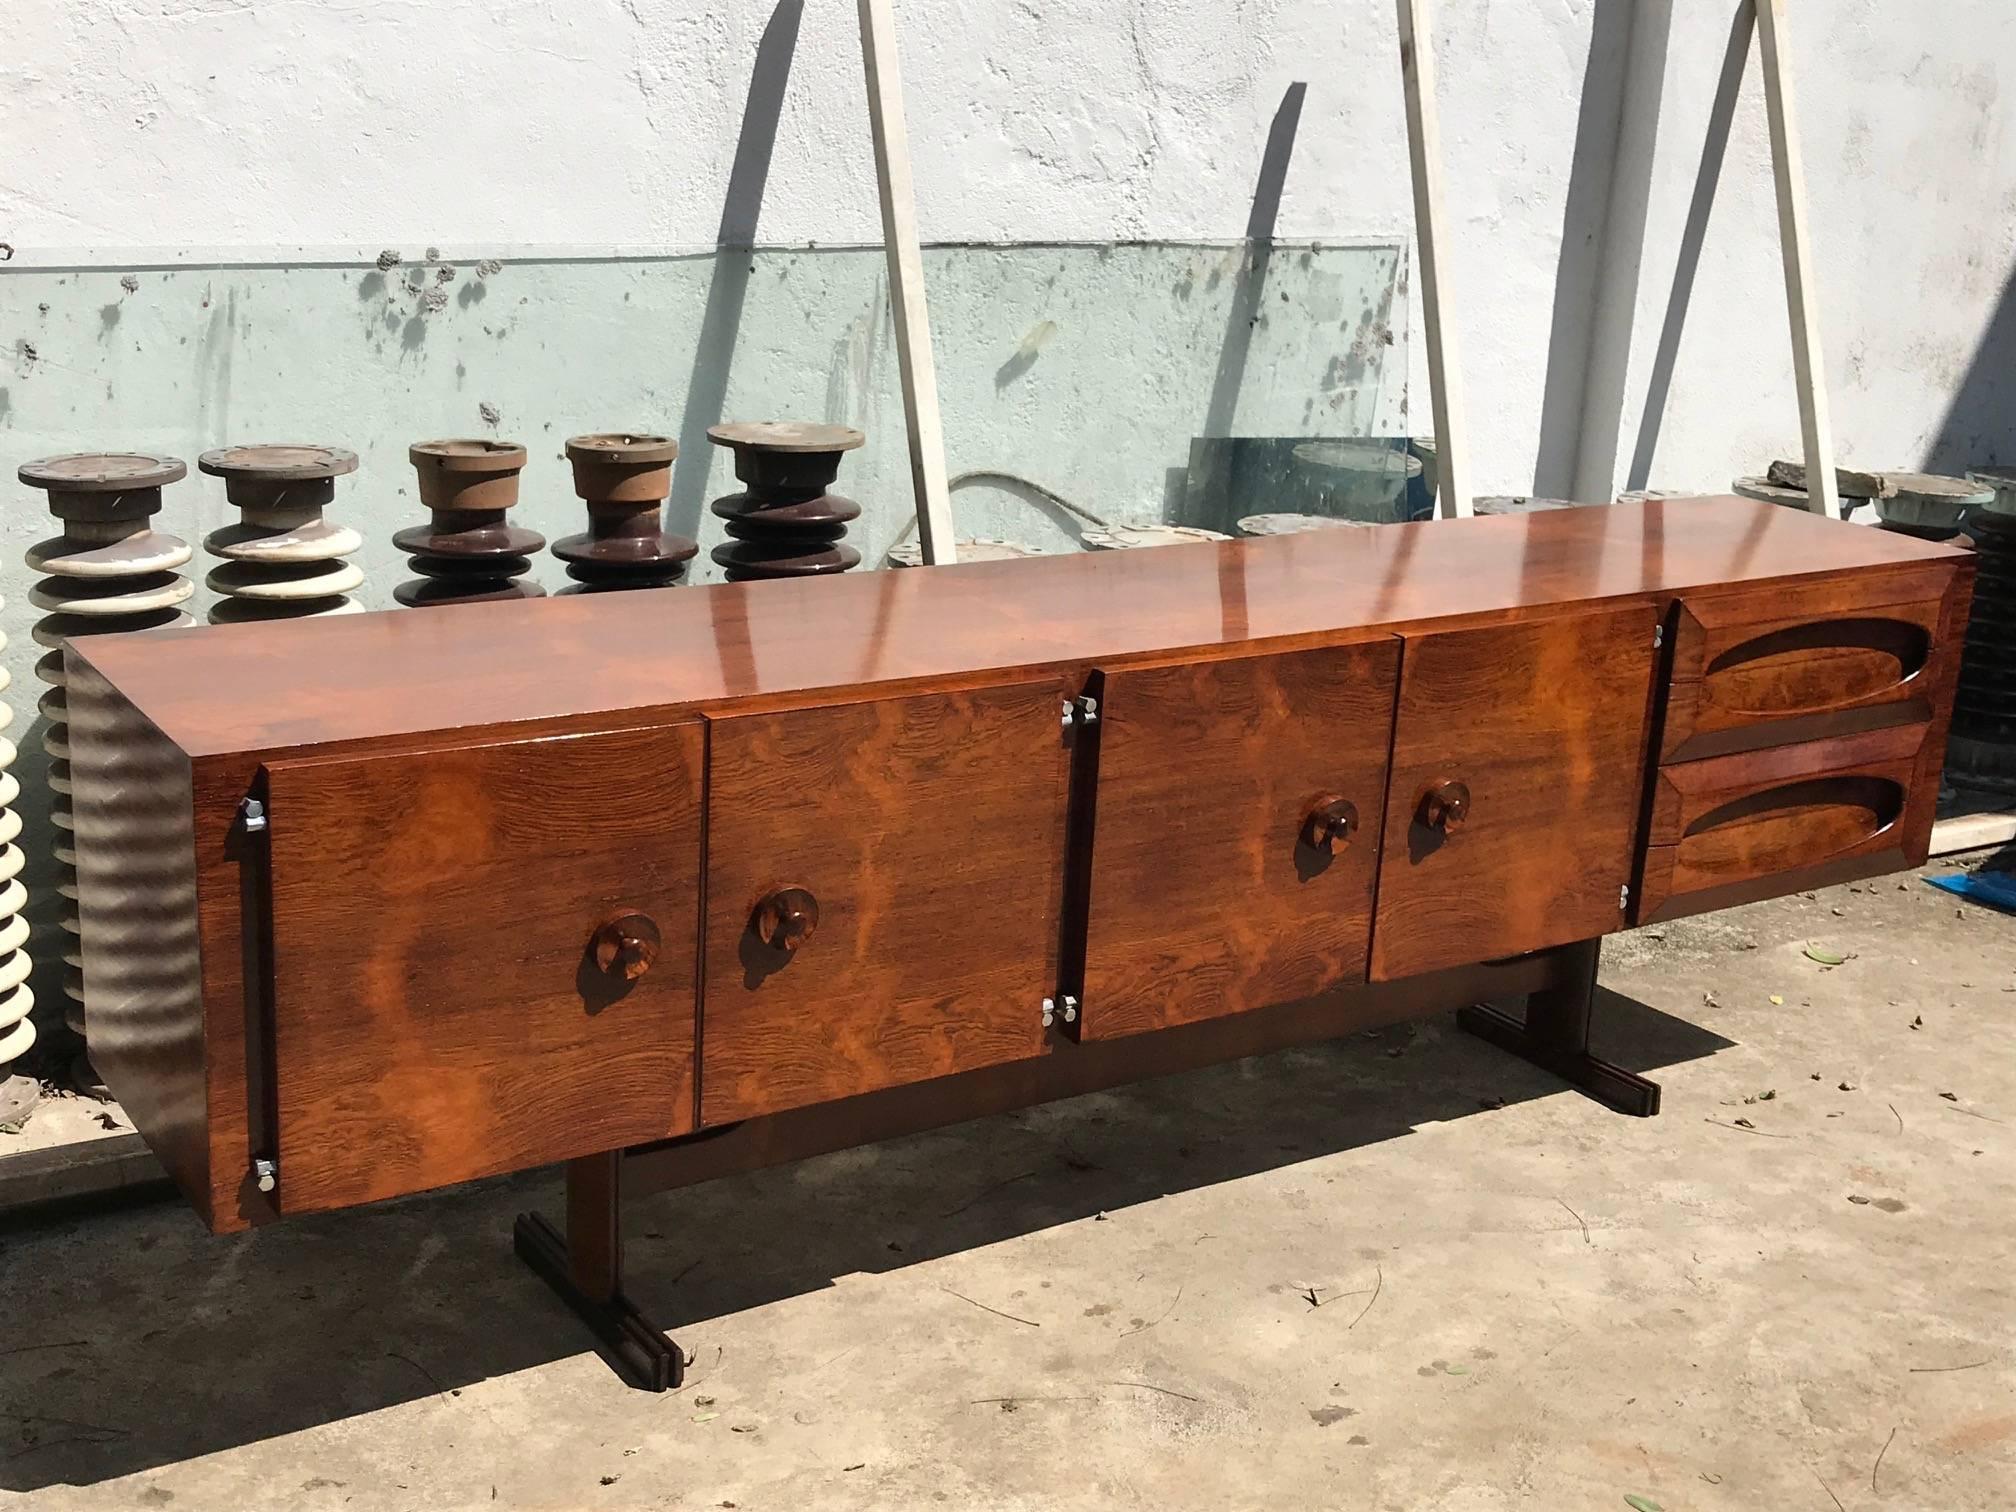 Named the 'Novo Rumo' this modern Brazilian sideboard is made of rosewood with very stylish design and unique drawers. Very good vintage original condition, never restored just polished.